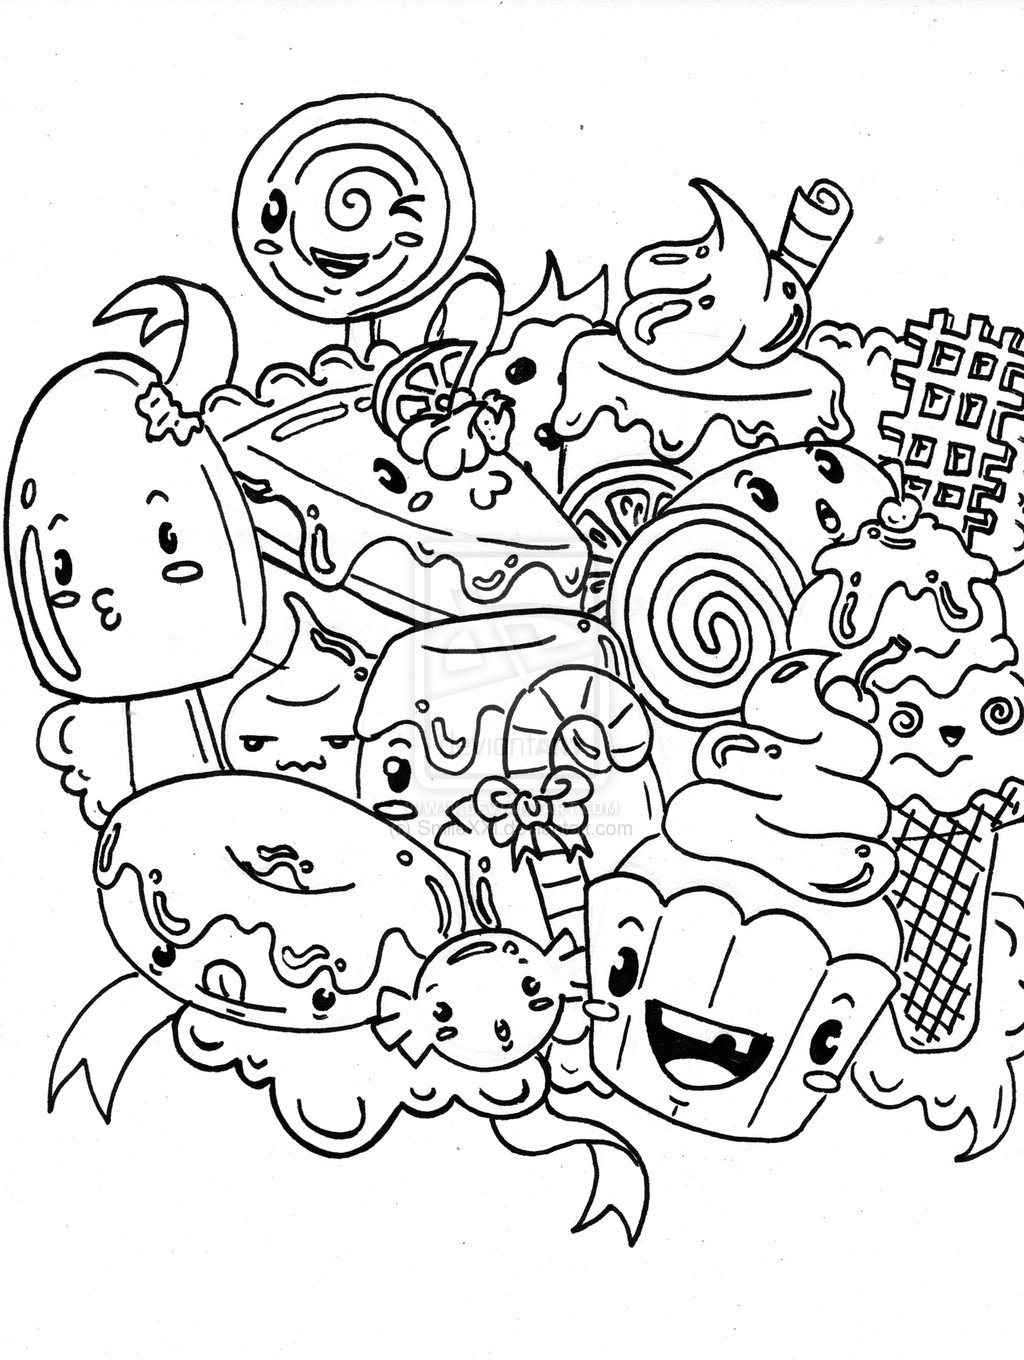 Candyland Characters Coloring Pages Candyland Coloring Pages Grandma Nut Displaying 17 Gt Images For